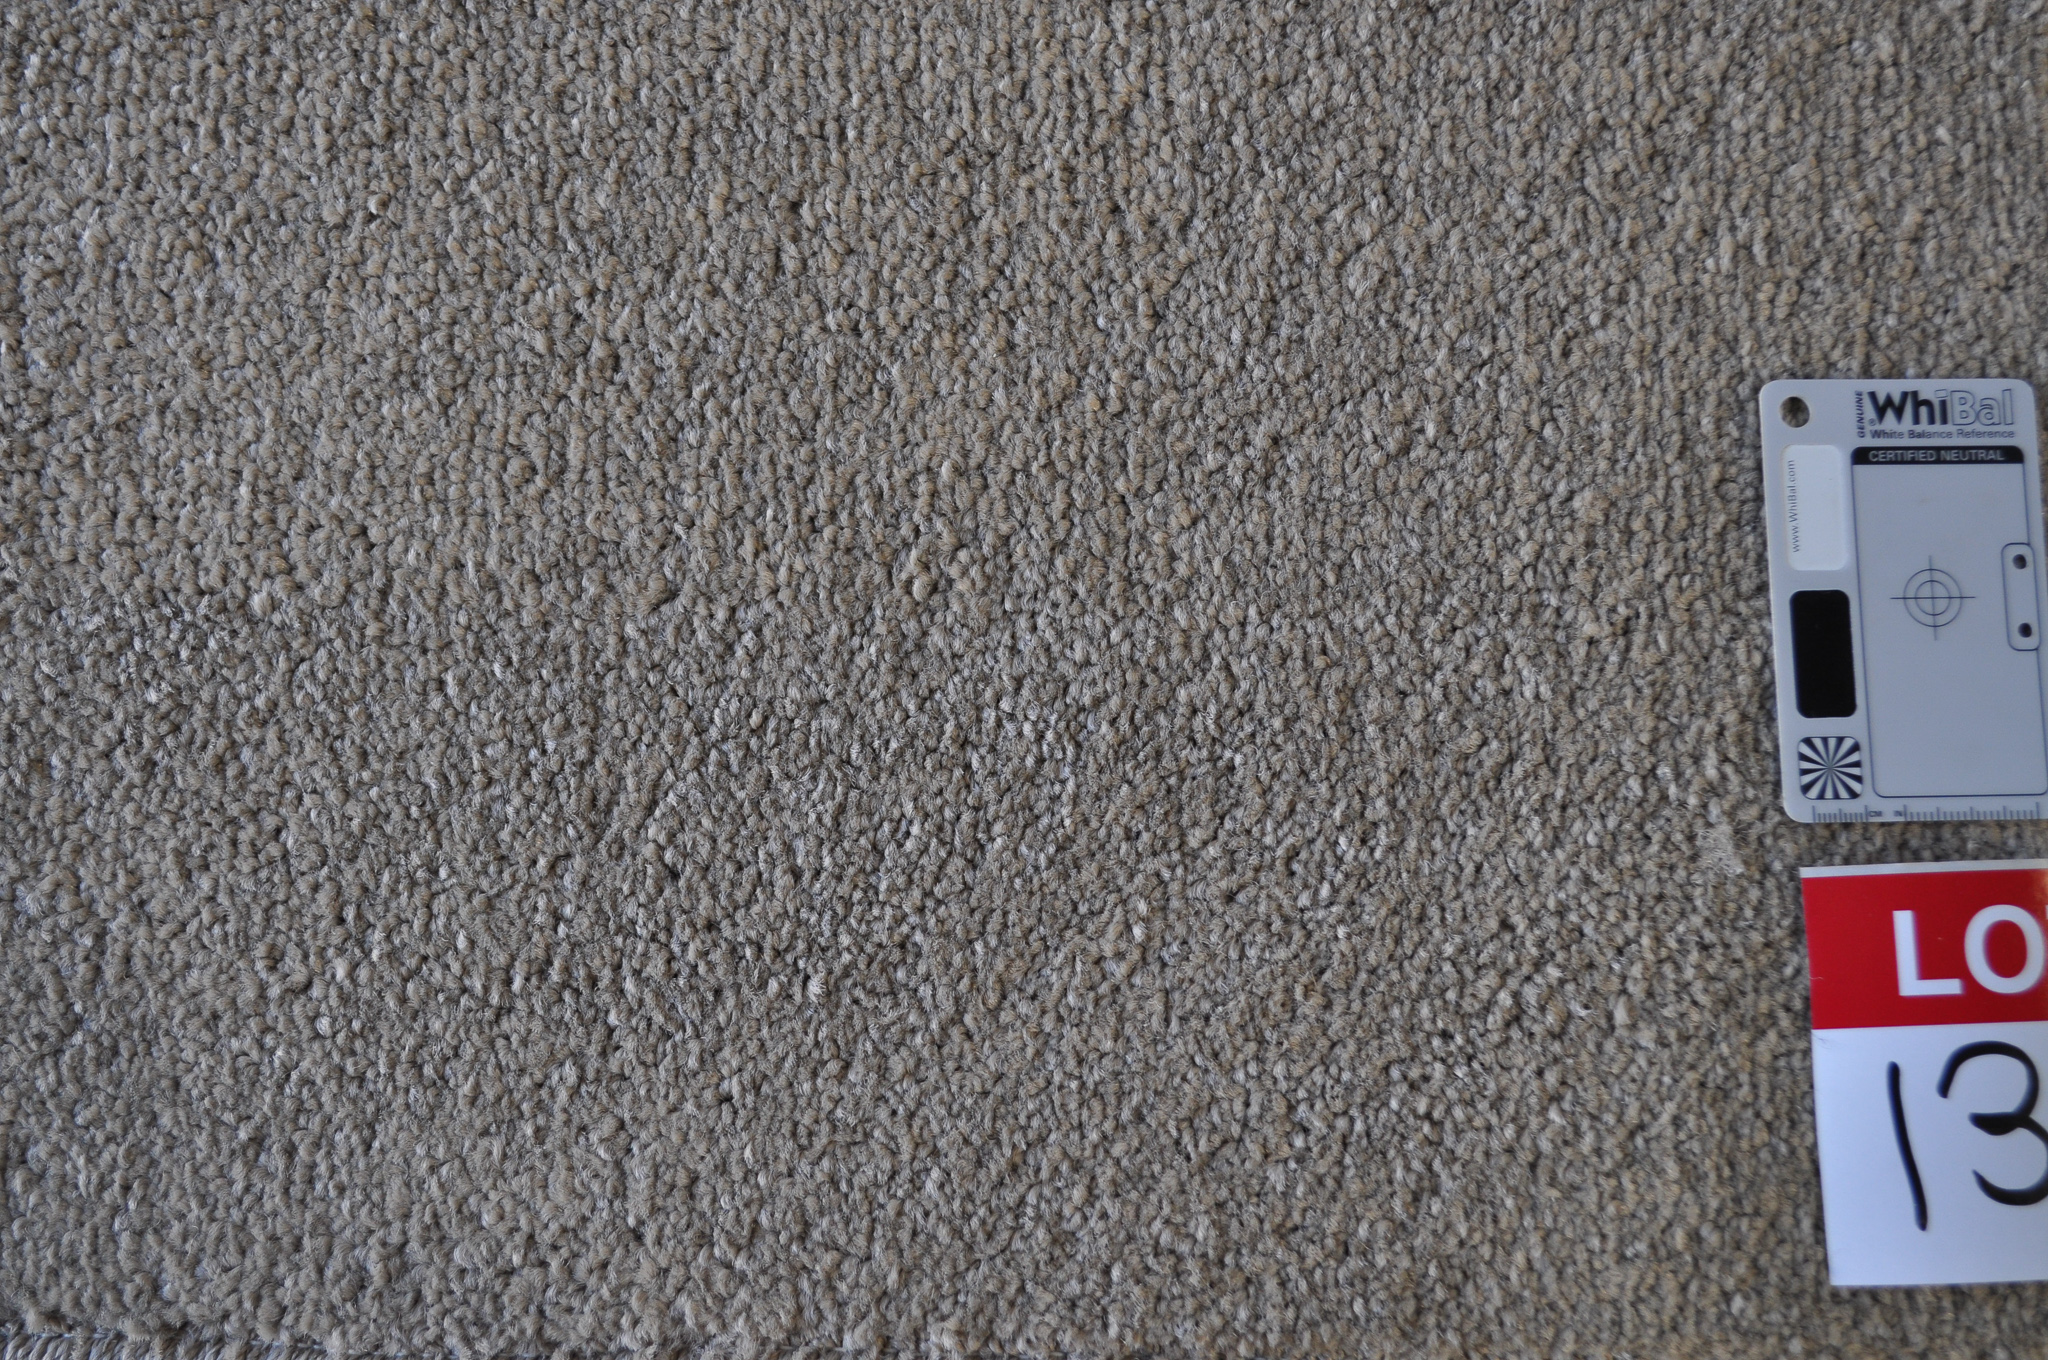 grey colored, twist pile roll of carpet on sale at Concord Floors, it being a remnant roll in Concord Floor's warehouse.